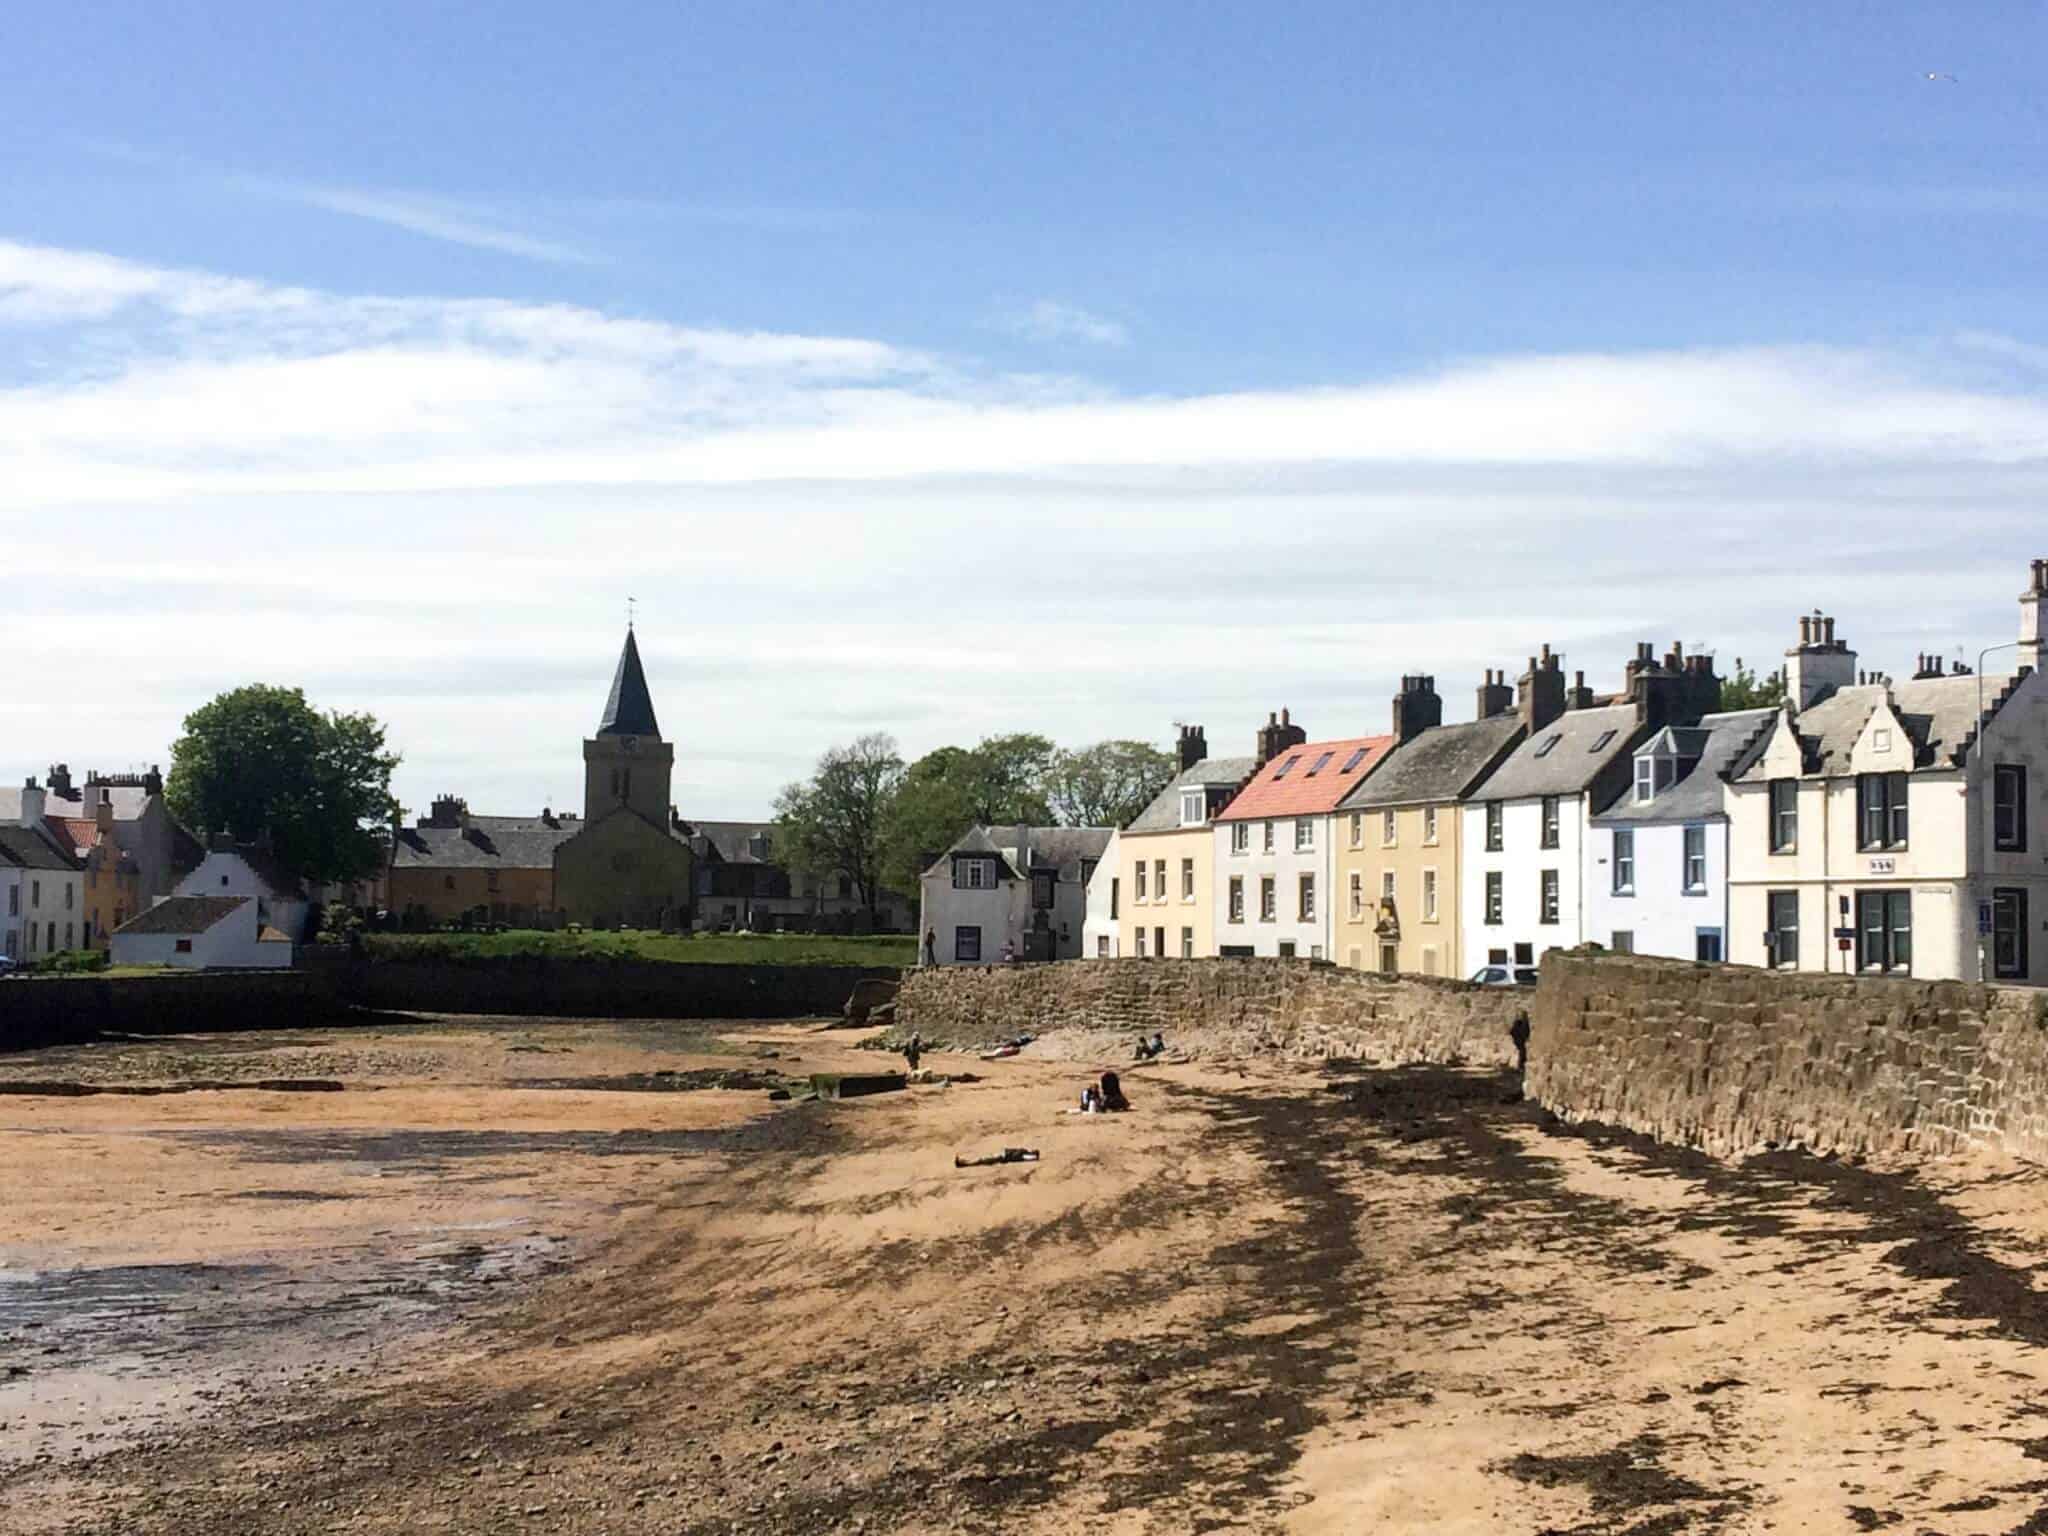 A guide to Anstruther, the East Neuk of Fife